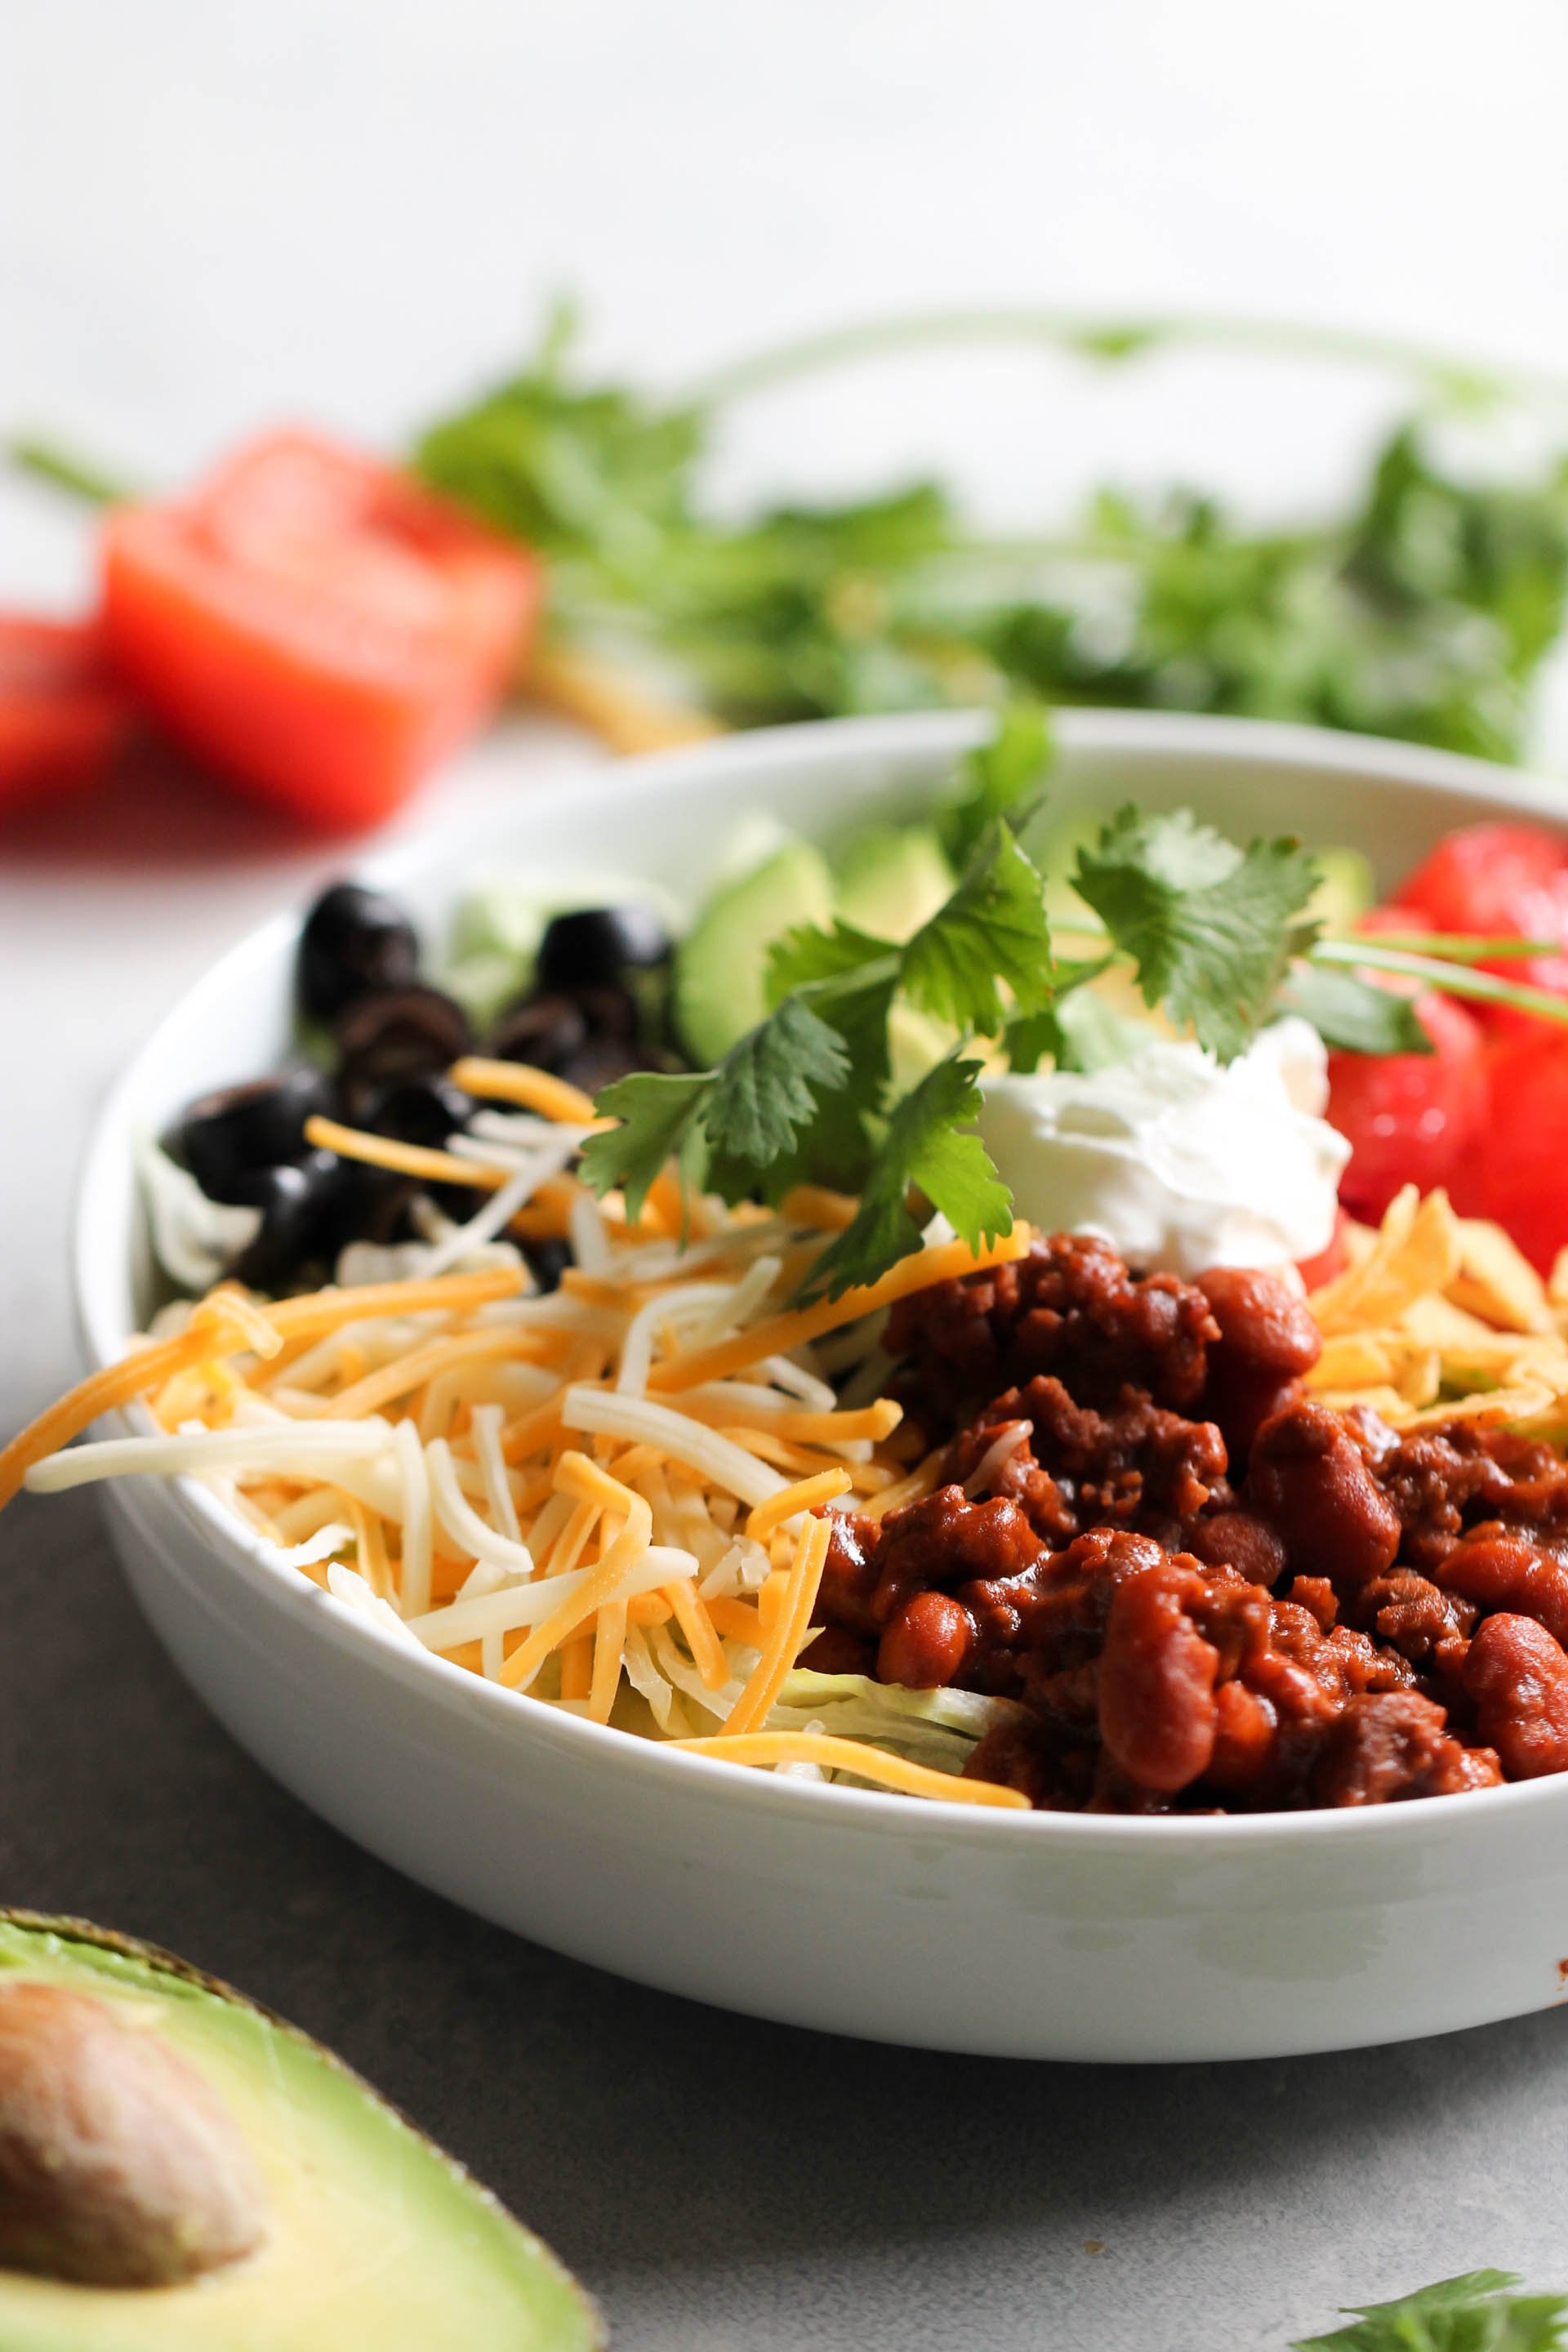 Our Family’s Favorite Taco Salad Recipe